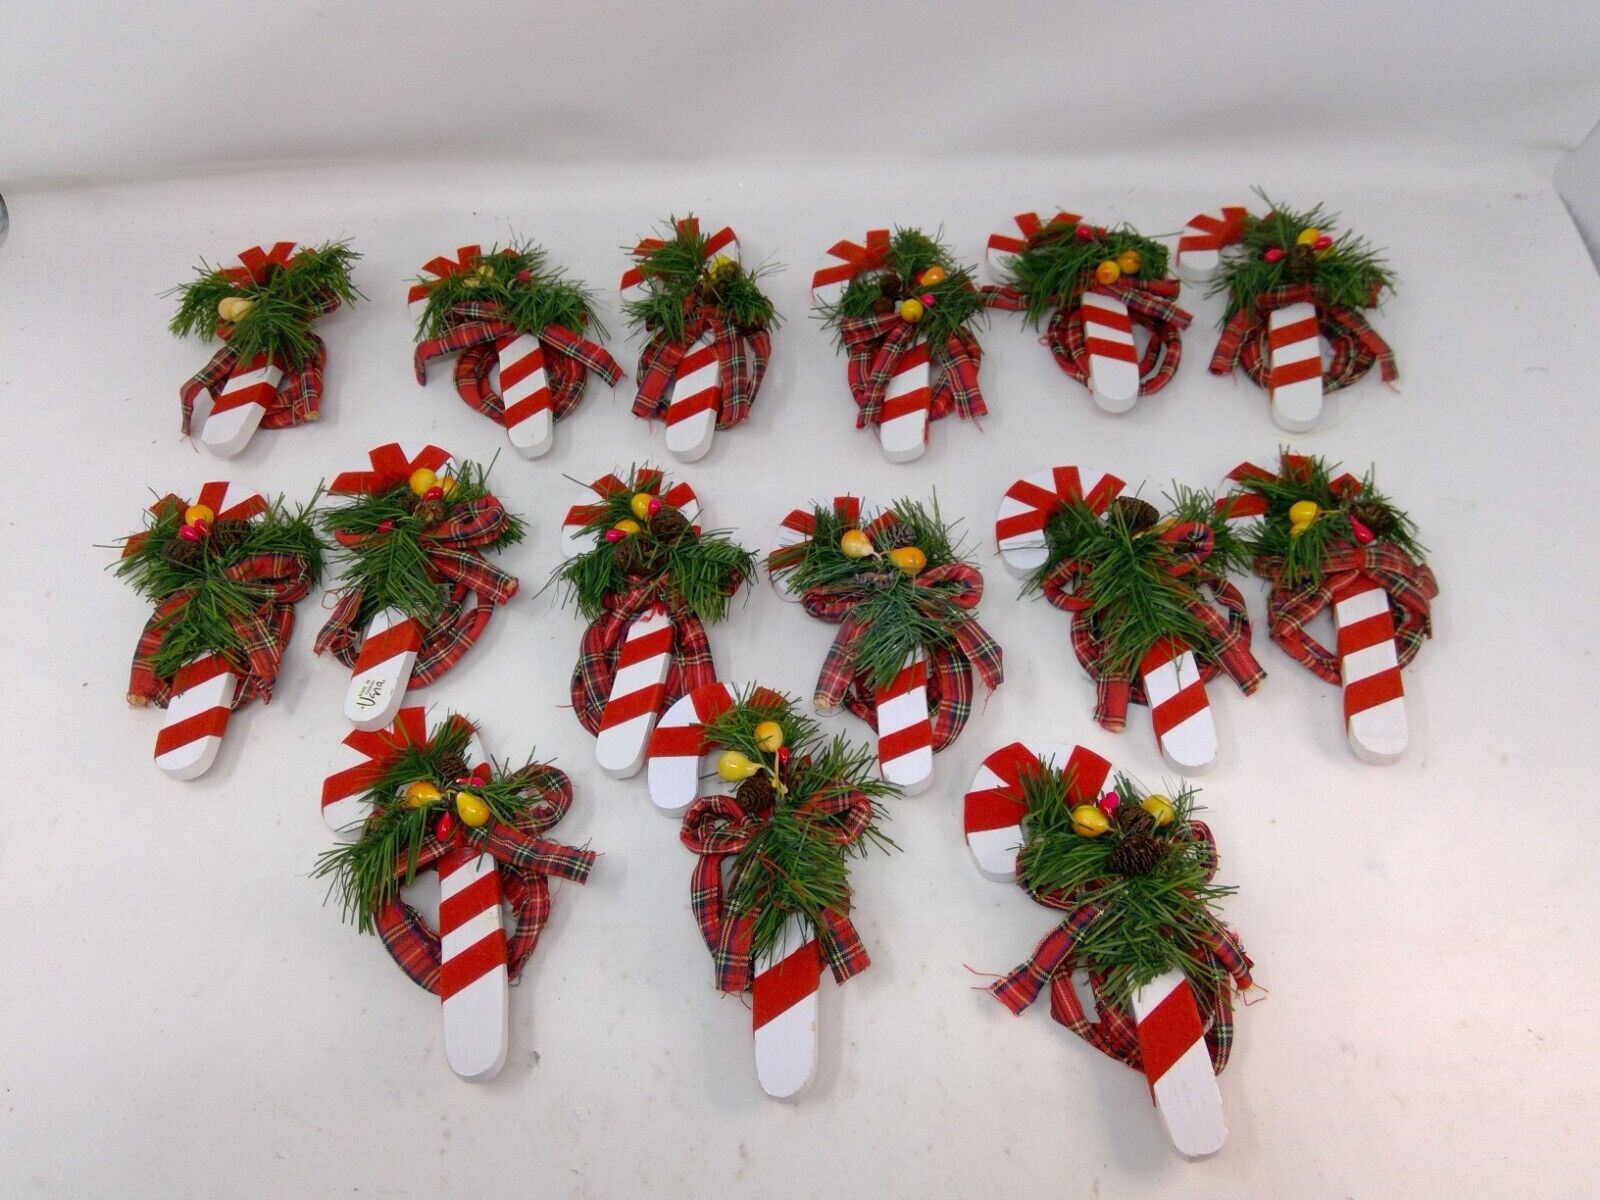 Group of 15 Vera Wood Wrapped in Velvet Christmas Candy Cane Napkin Rings